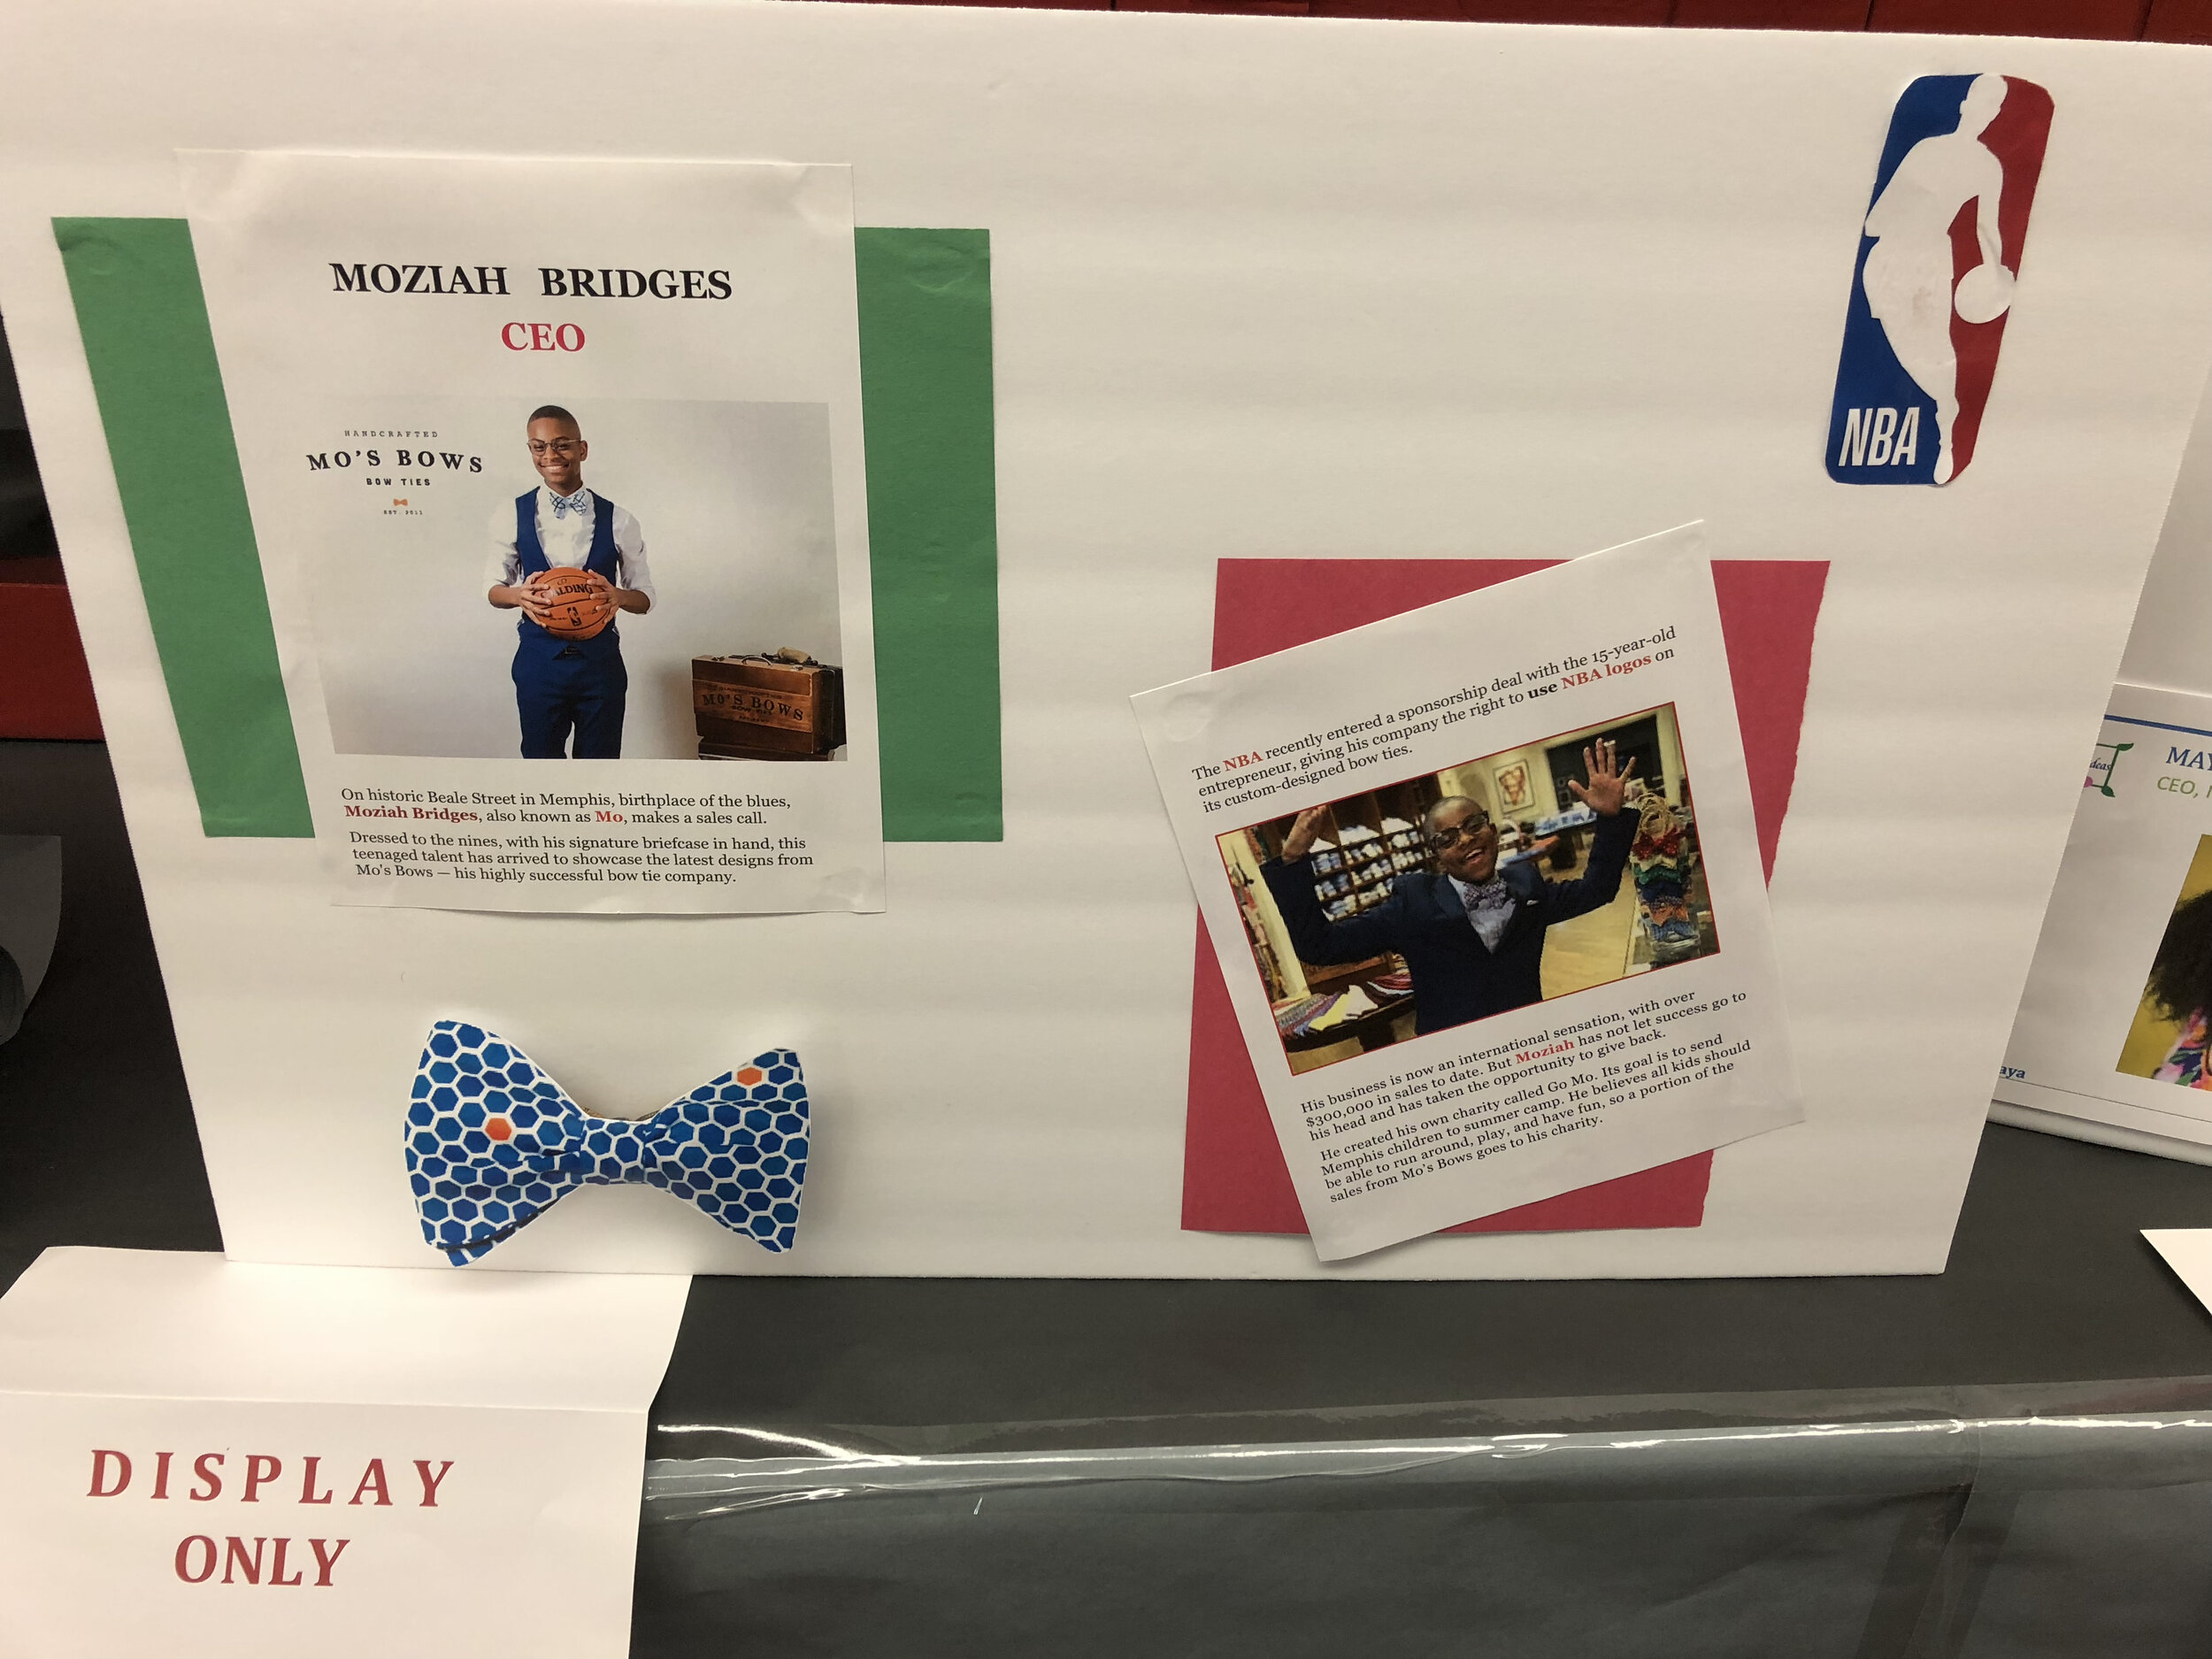  Poster display of Moziah Bridges, teen with his mother created a bow tie business which received a contract from the NBA.